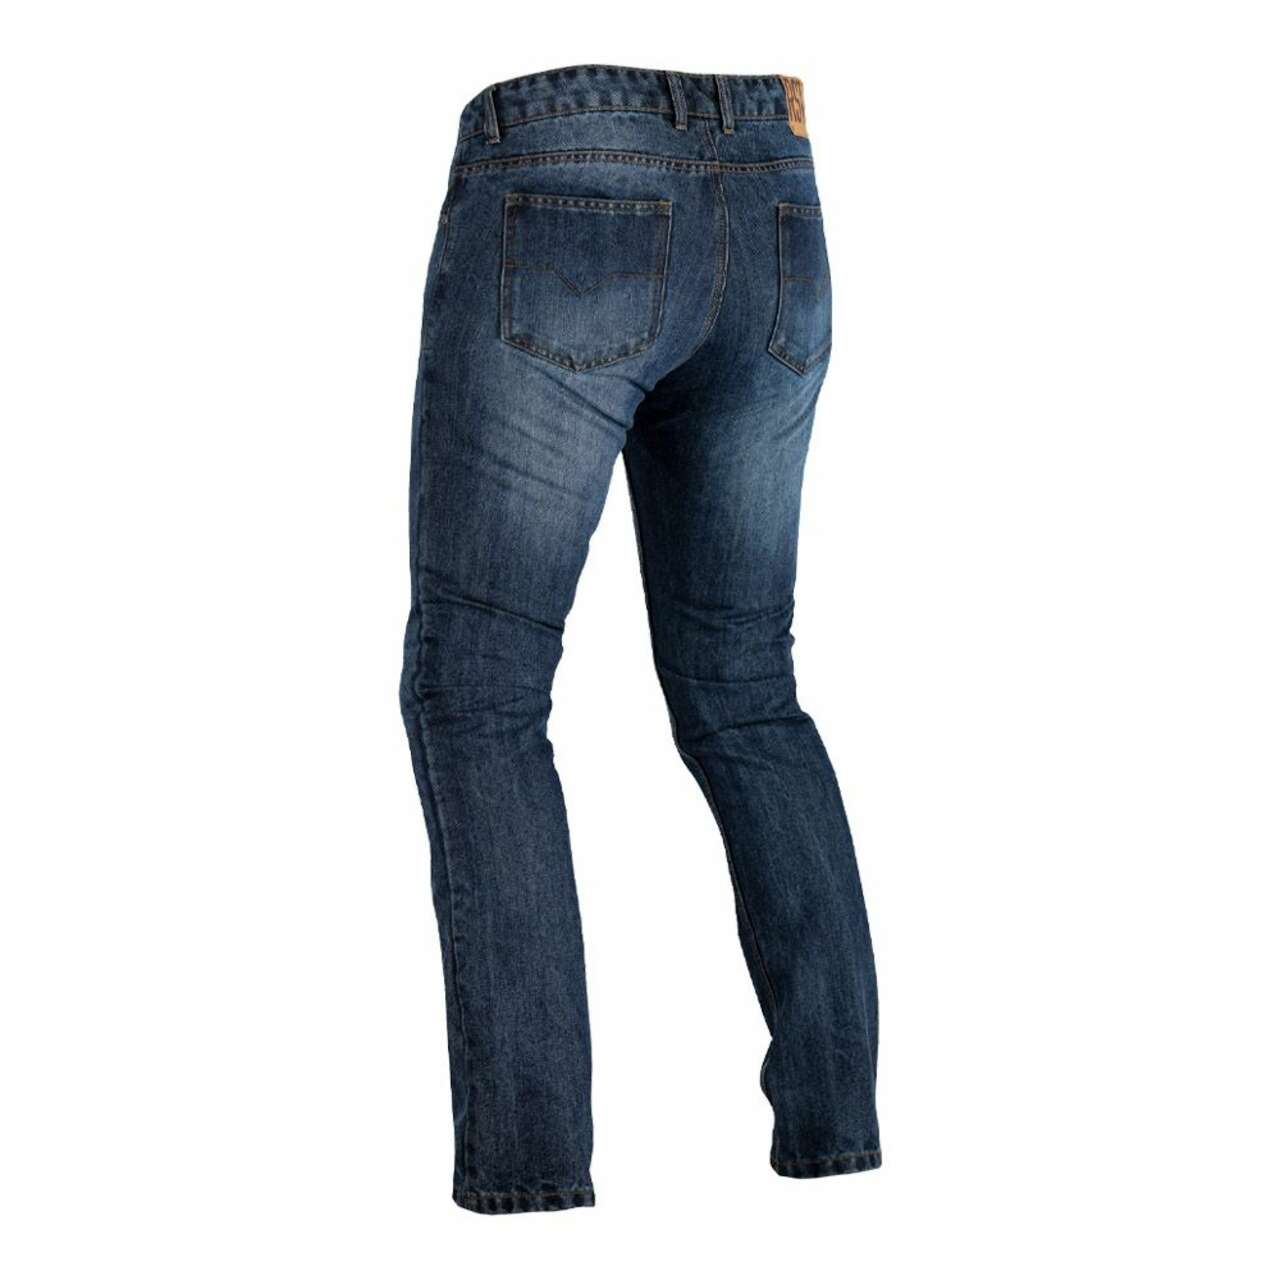 Single Layer Jeans